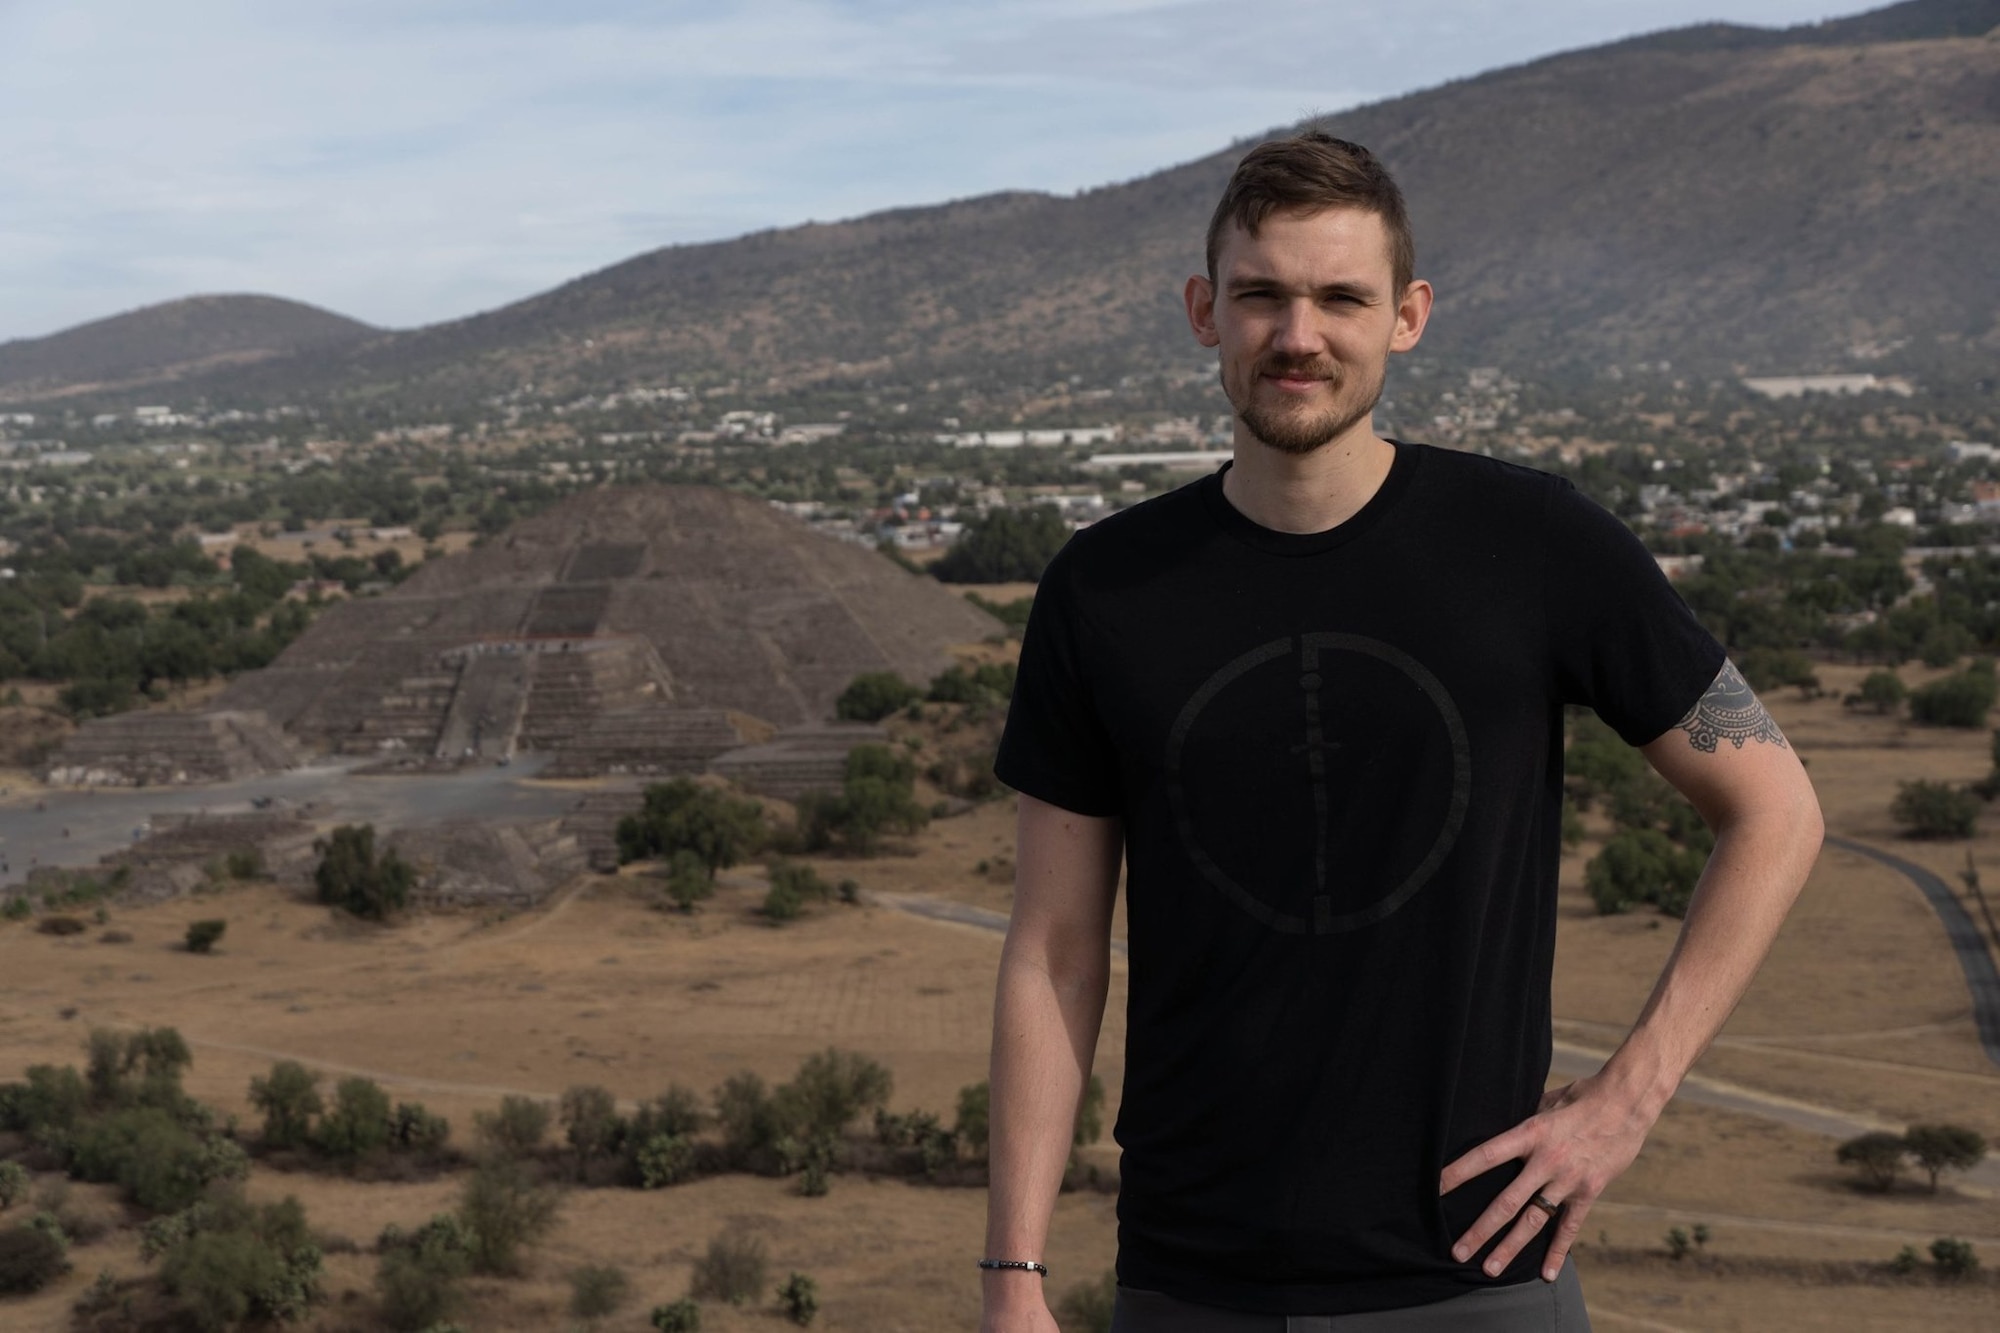 Staff Sgt. Jeffrey Grossi, a photojournalist assigned to the 910th Airlift Wing’s Public Affairs Office, poses in front of the temple of the moon while standing on top of the temple of the sun on Jan. 3, 2020, Teotihuacan, Mexico. Grossi was in Mexico to premiere a Penn State documentary called Land and Water Revisited. The Land and Water Revisited Project aims to document the drastic changes that have occurred to the people and the environment of the Teotihuacan Valley in the last 50 years.